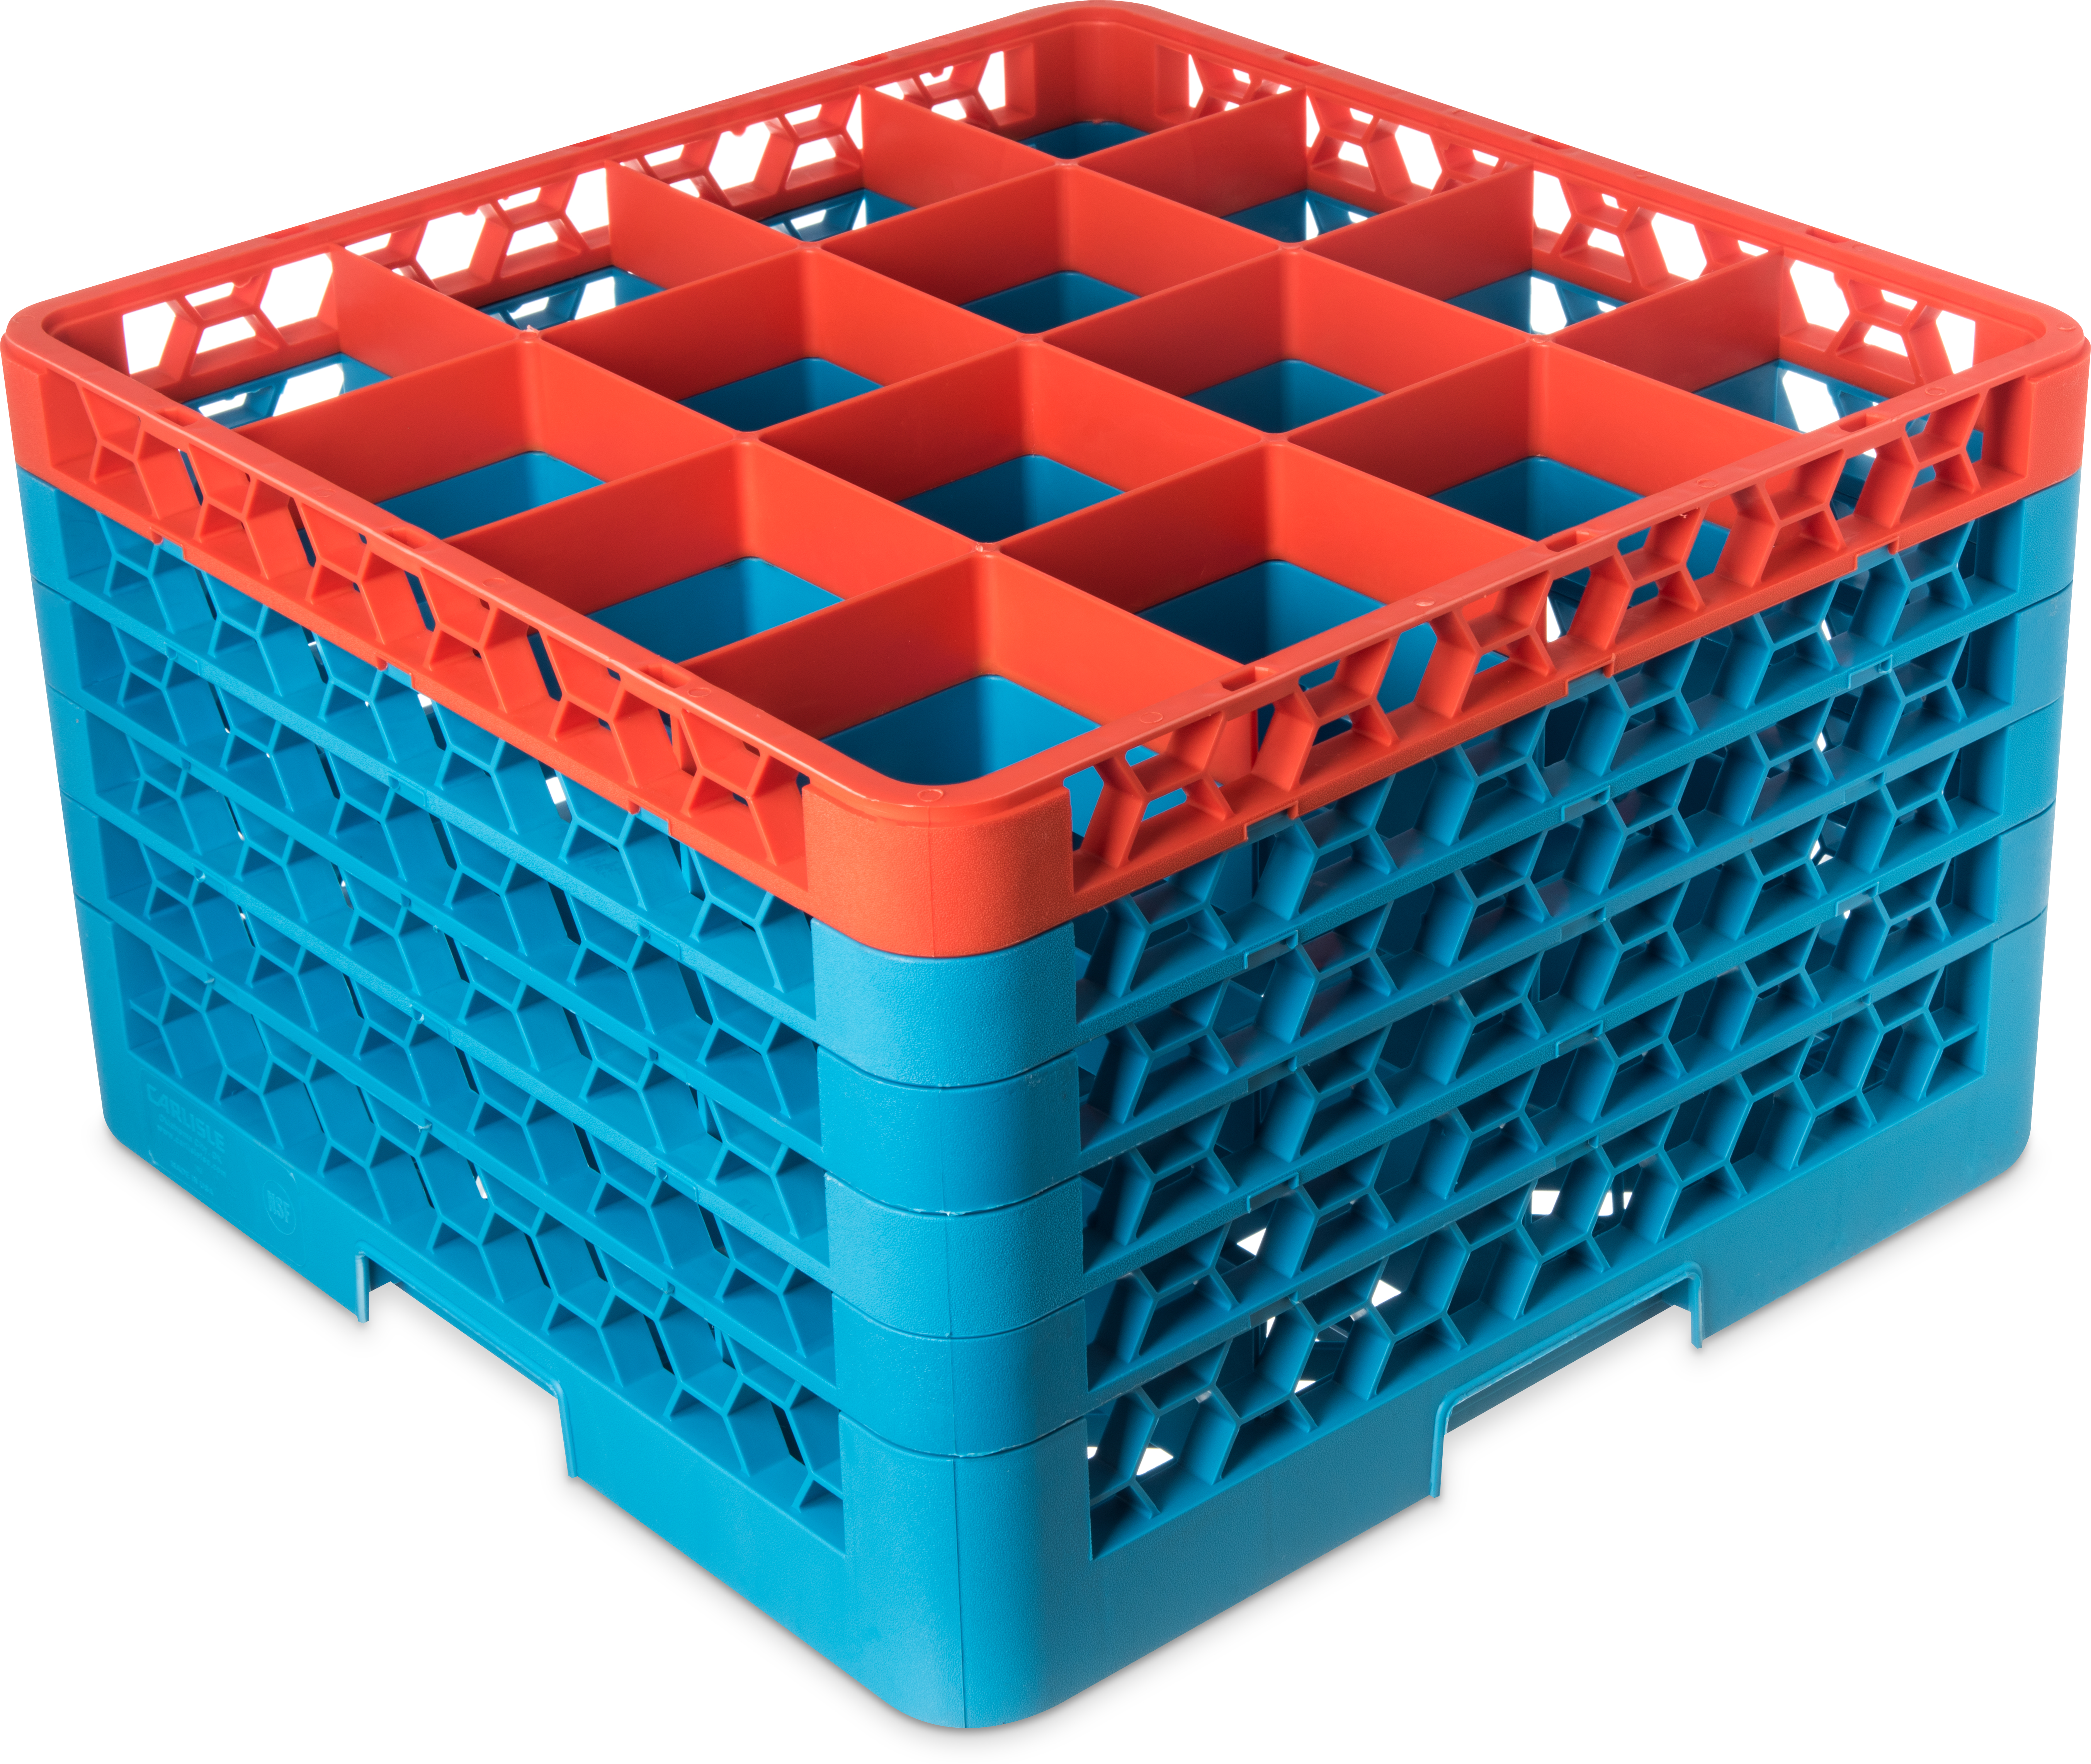 OptiClean 16 Compartment Glass Rack with 5 Extenders 11.9 - Orange-Carlisle Blue